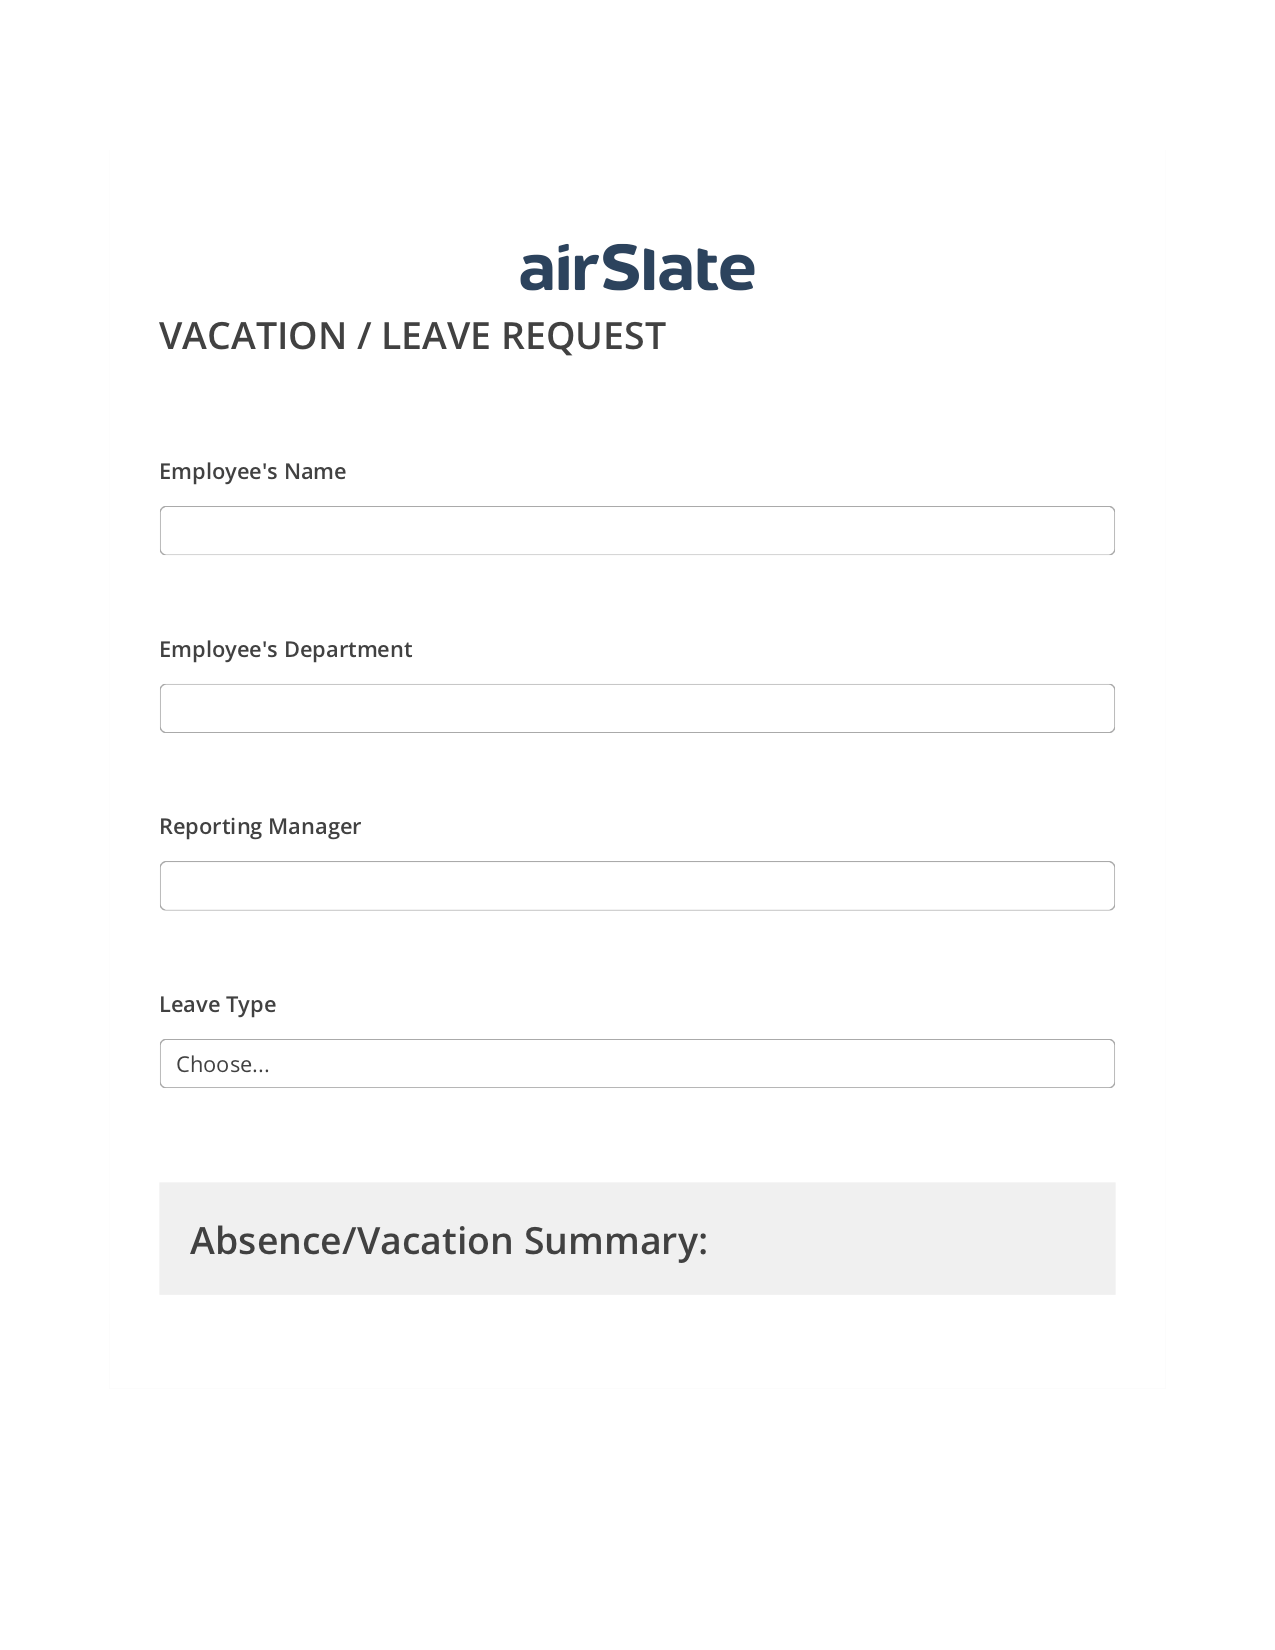 Vacation/Leave Request Workflow Pre-fill from CSV File Bot, Hide Signatures Bot, Export to Excel 365 Bot